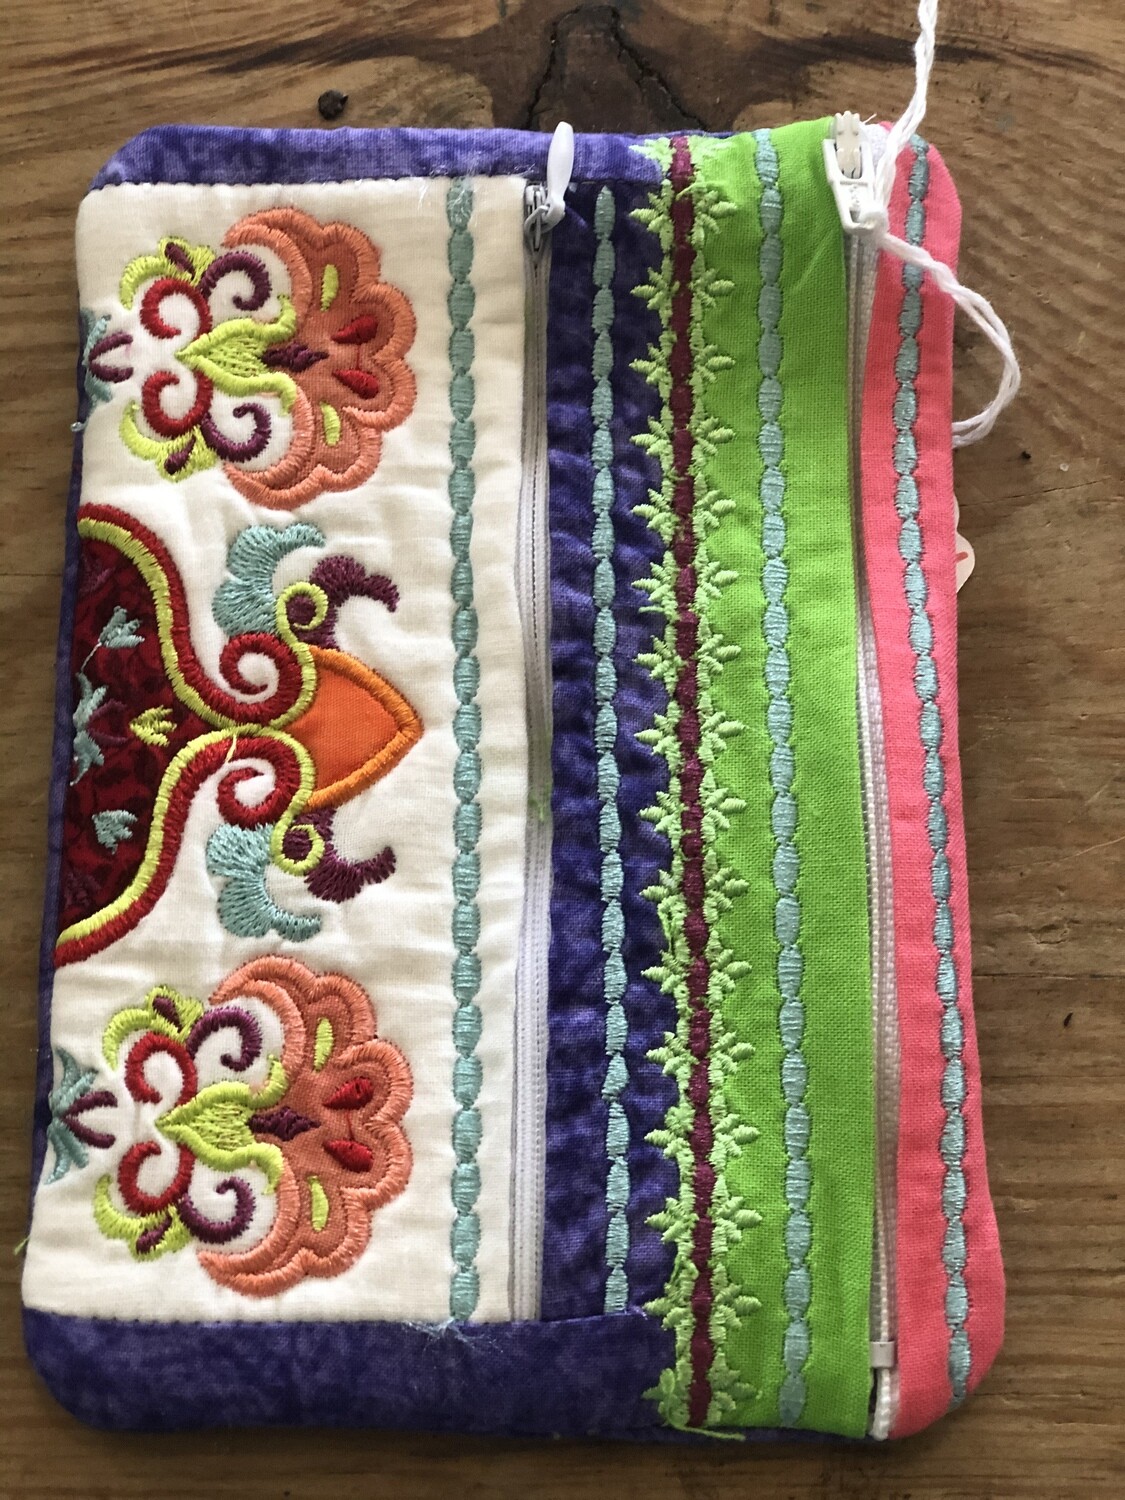 Handmade Embroidered Pouch by Marie Jacappo Allen